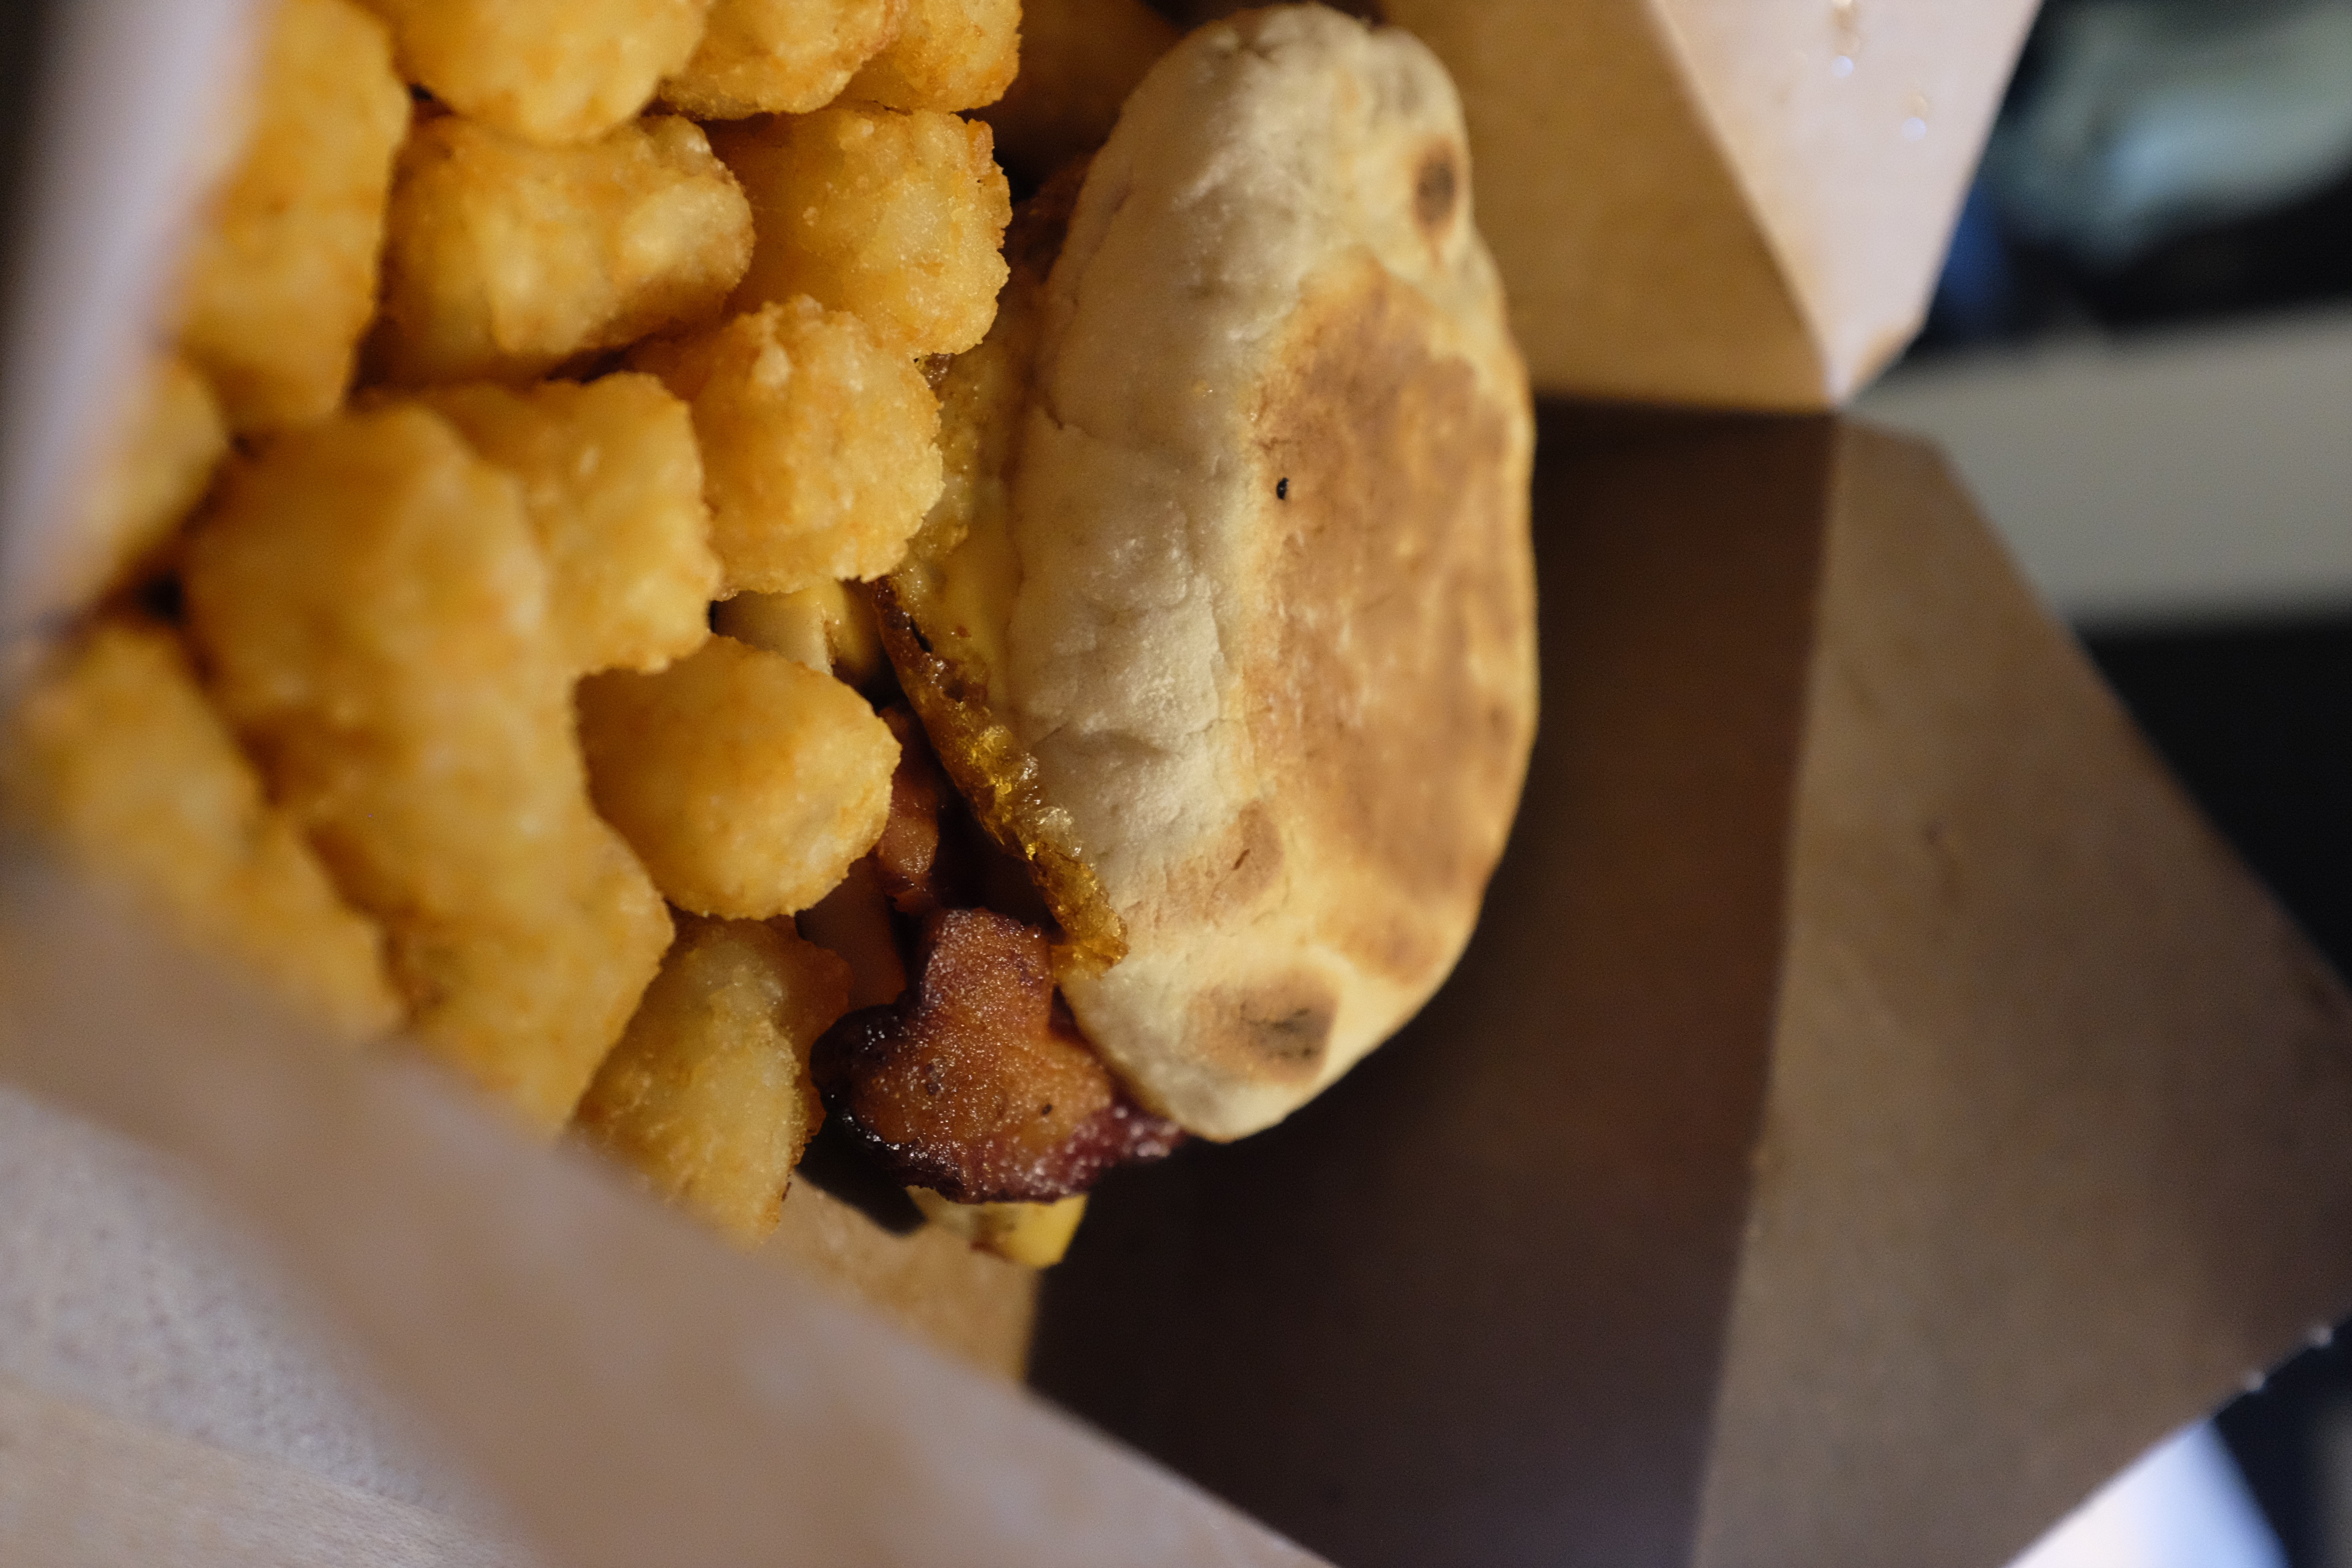 A sandwich of english muffin, egg and bacon sits in a take-out cardboard box, nested among a pile of tater tots.